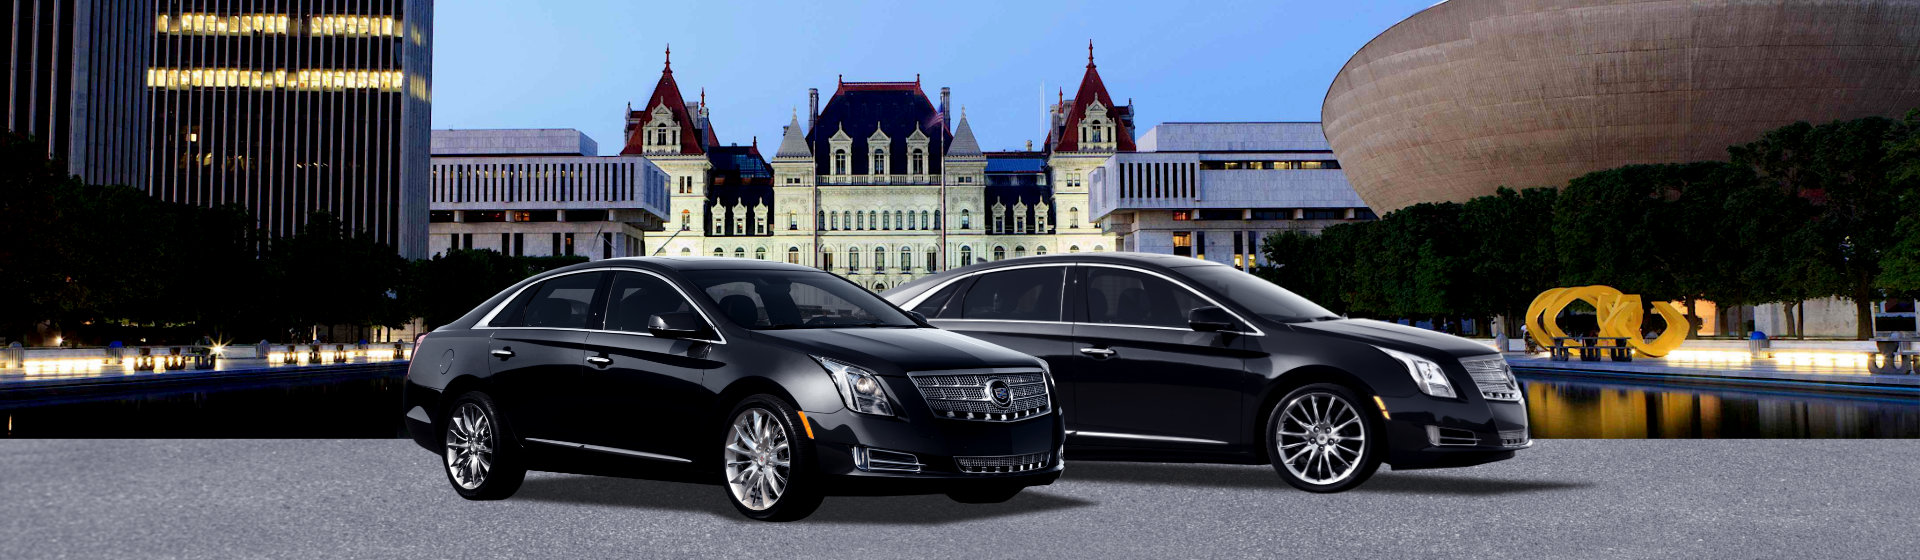 Albany Car and Limousine Services